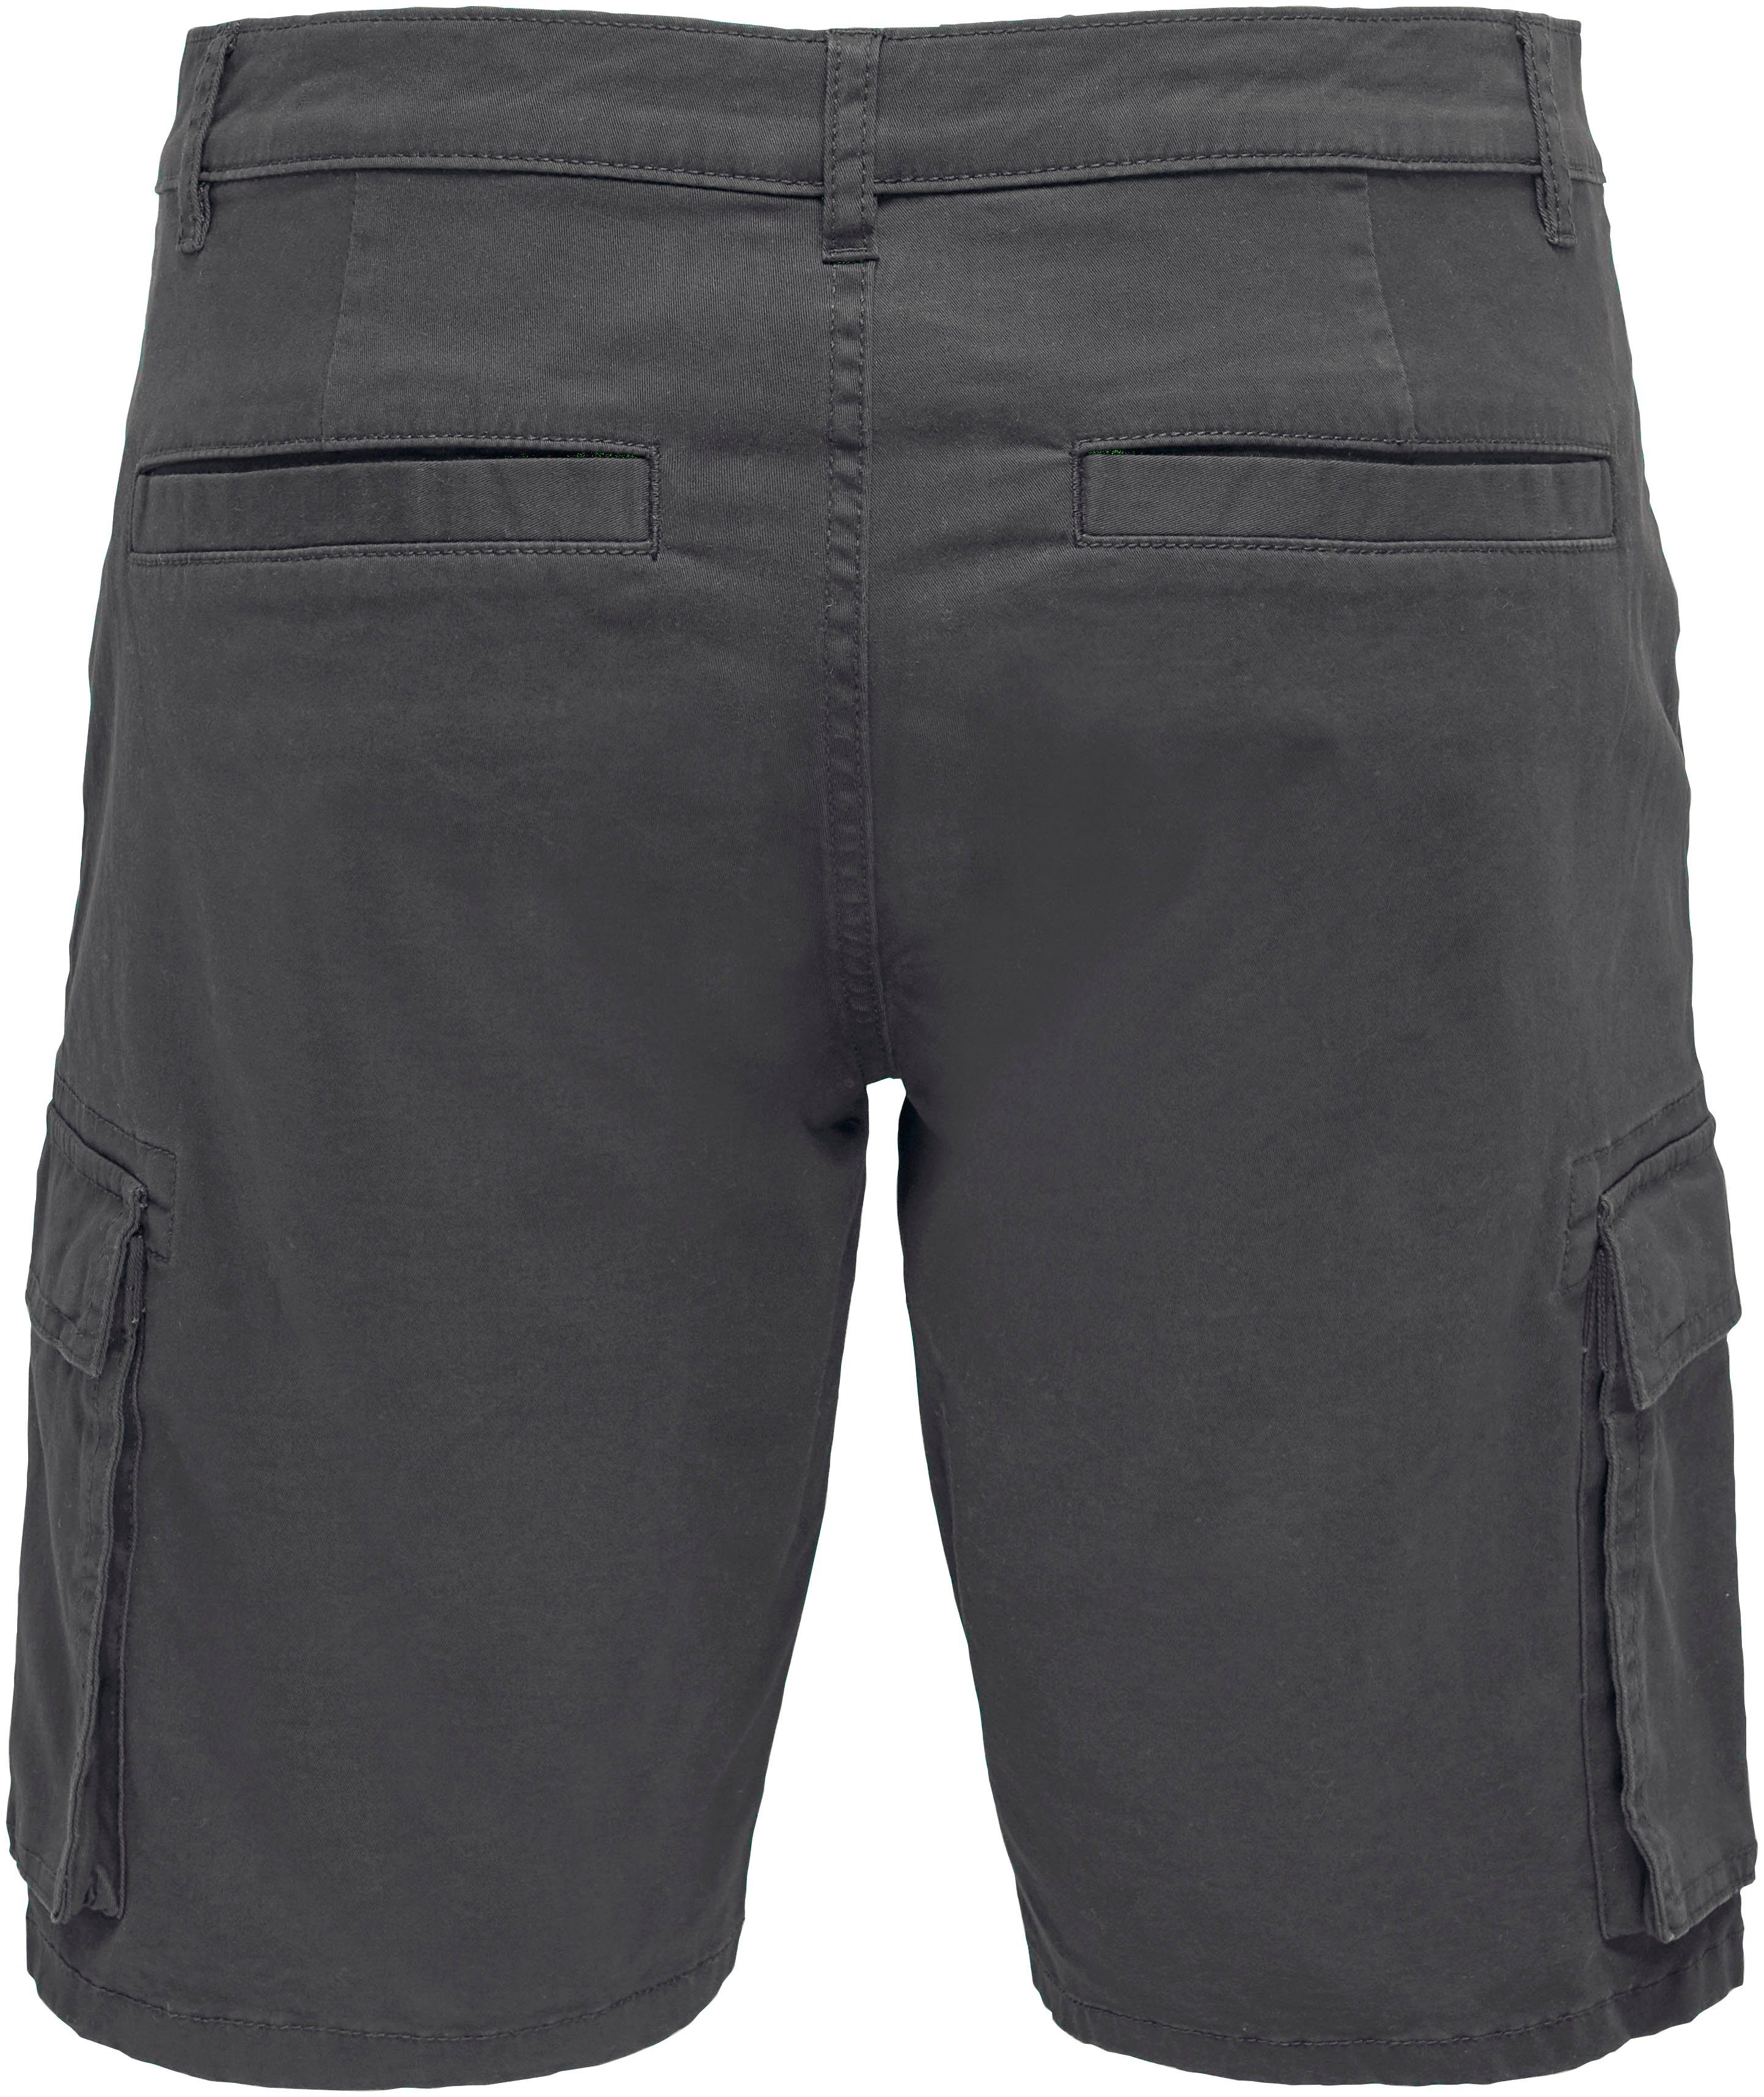 SHORTS Cargoshorts ONLY CAM STAGE SONS & CARGO grau